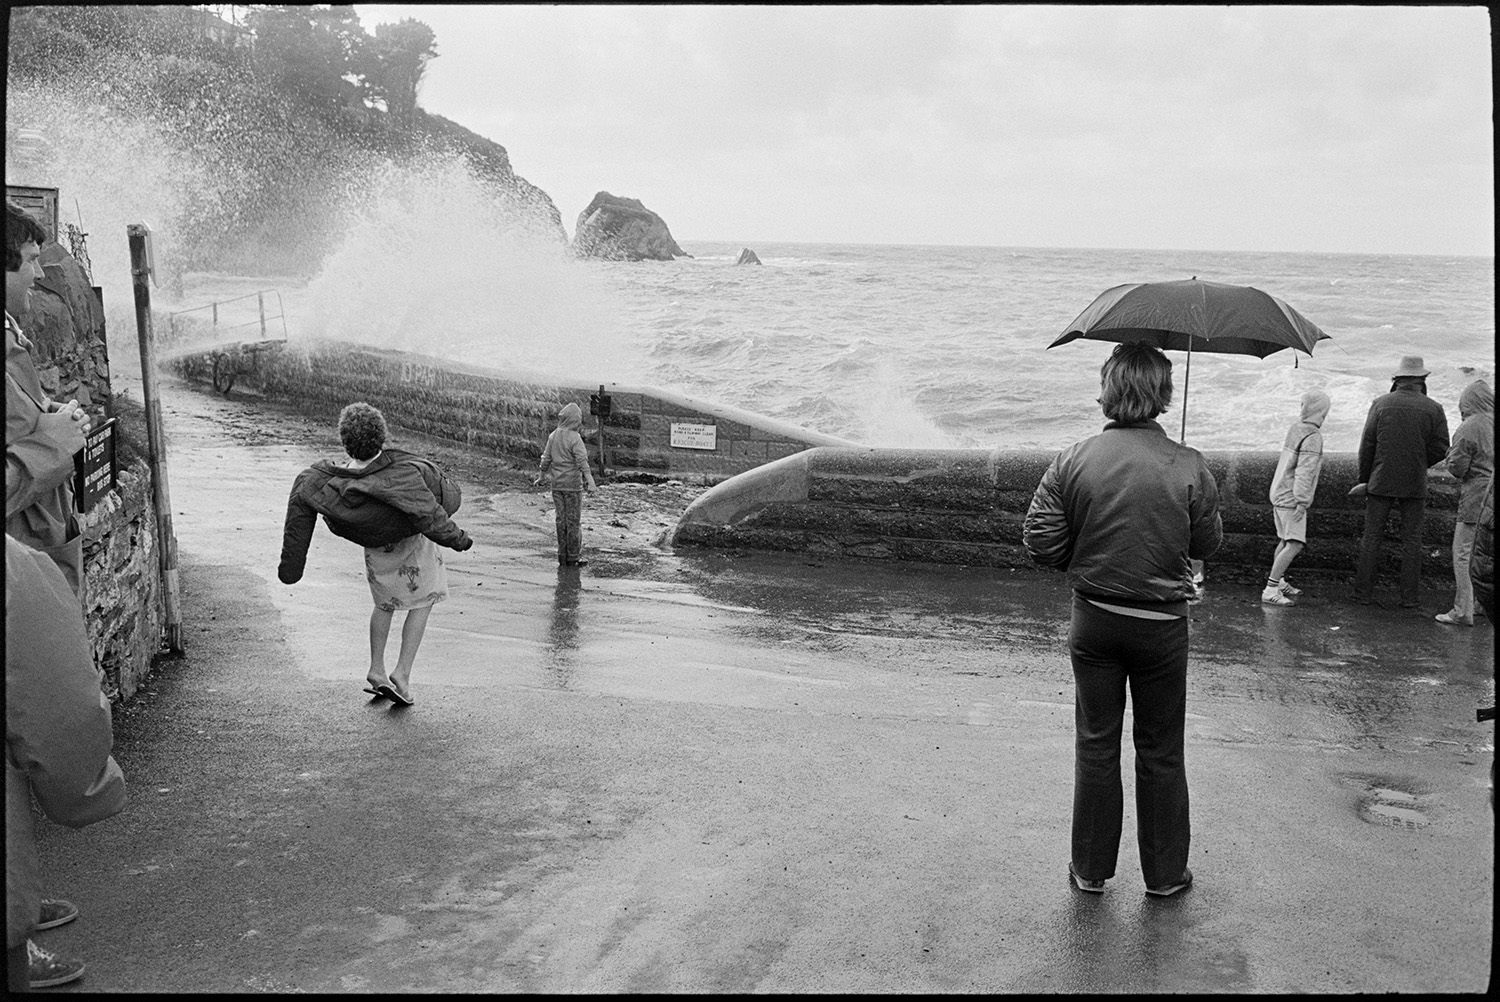 Holidaymakers watching rough seas breaking over sea wall.
[Holidaymakers watching rough seas breaking over a sea wall at Lee Bay. A man is standing holding an umbrella in the foreground and looking at the waves.]